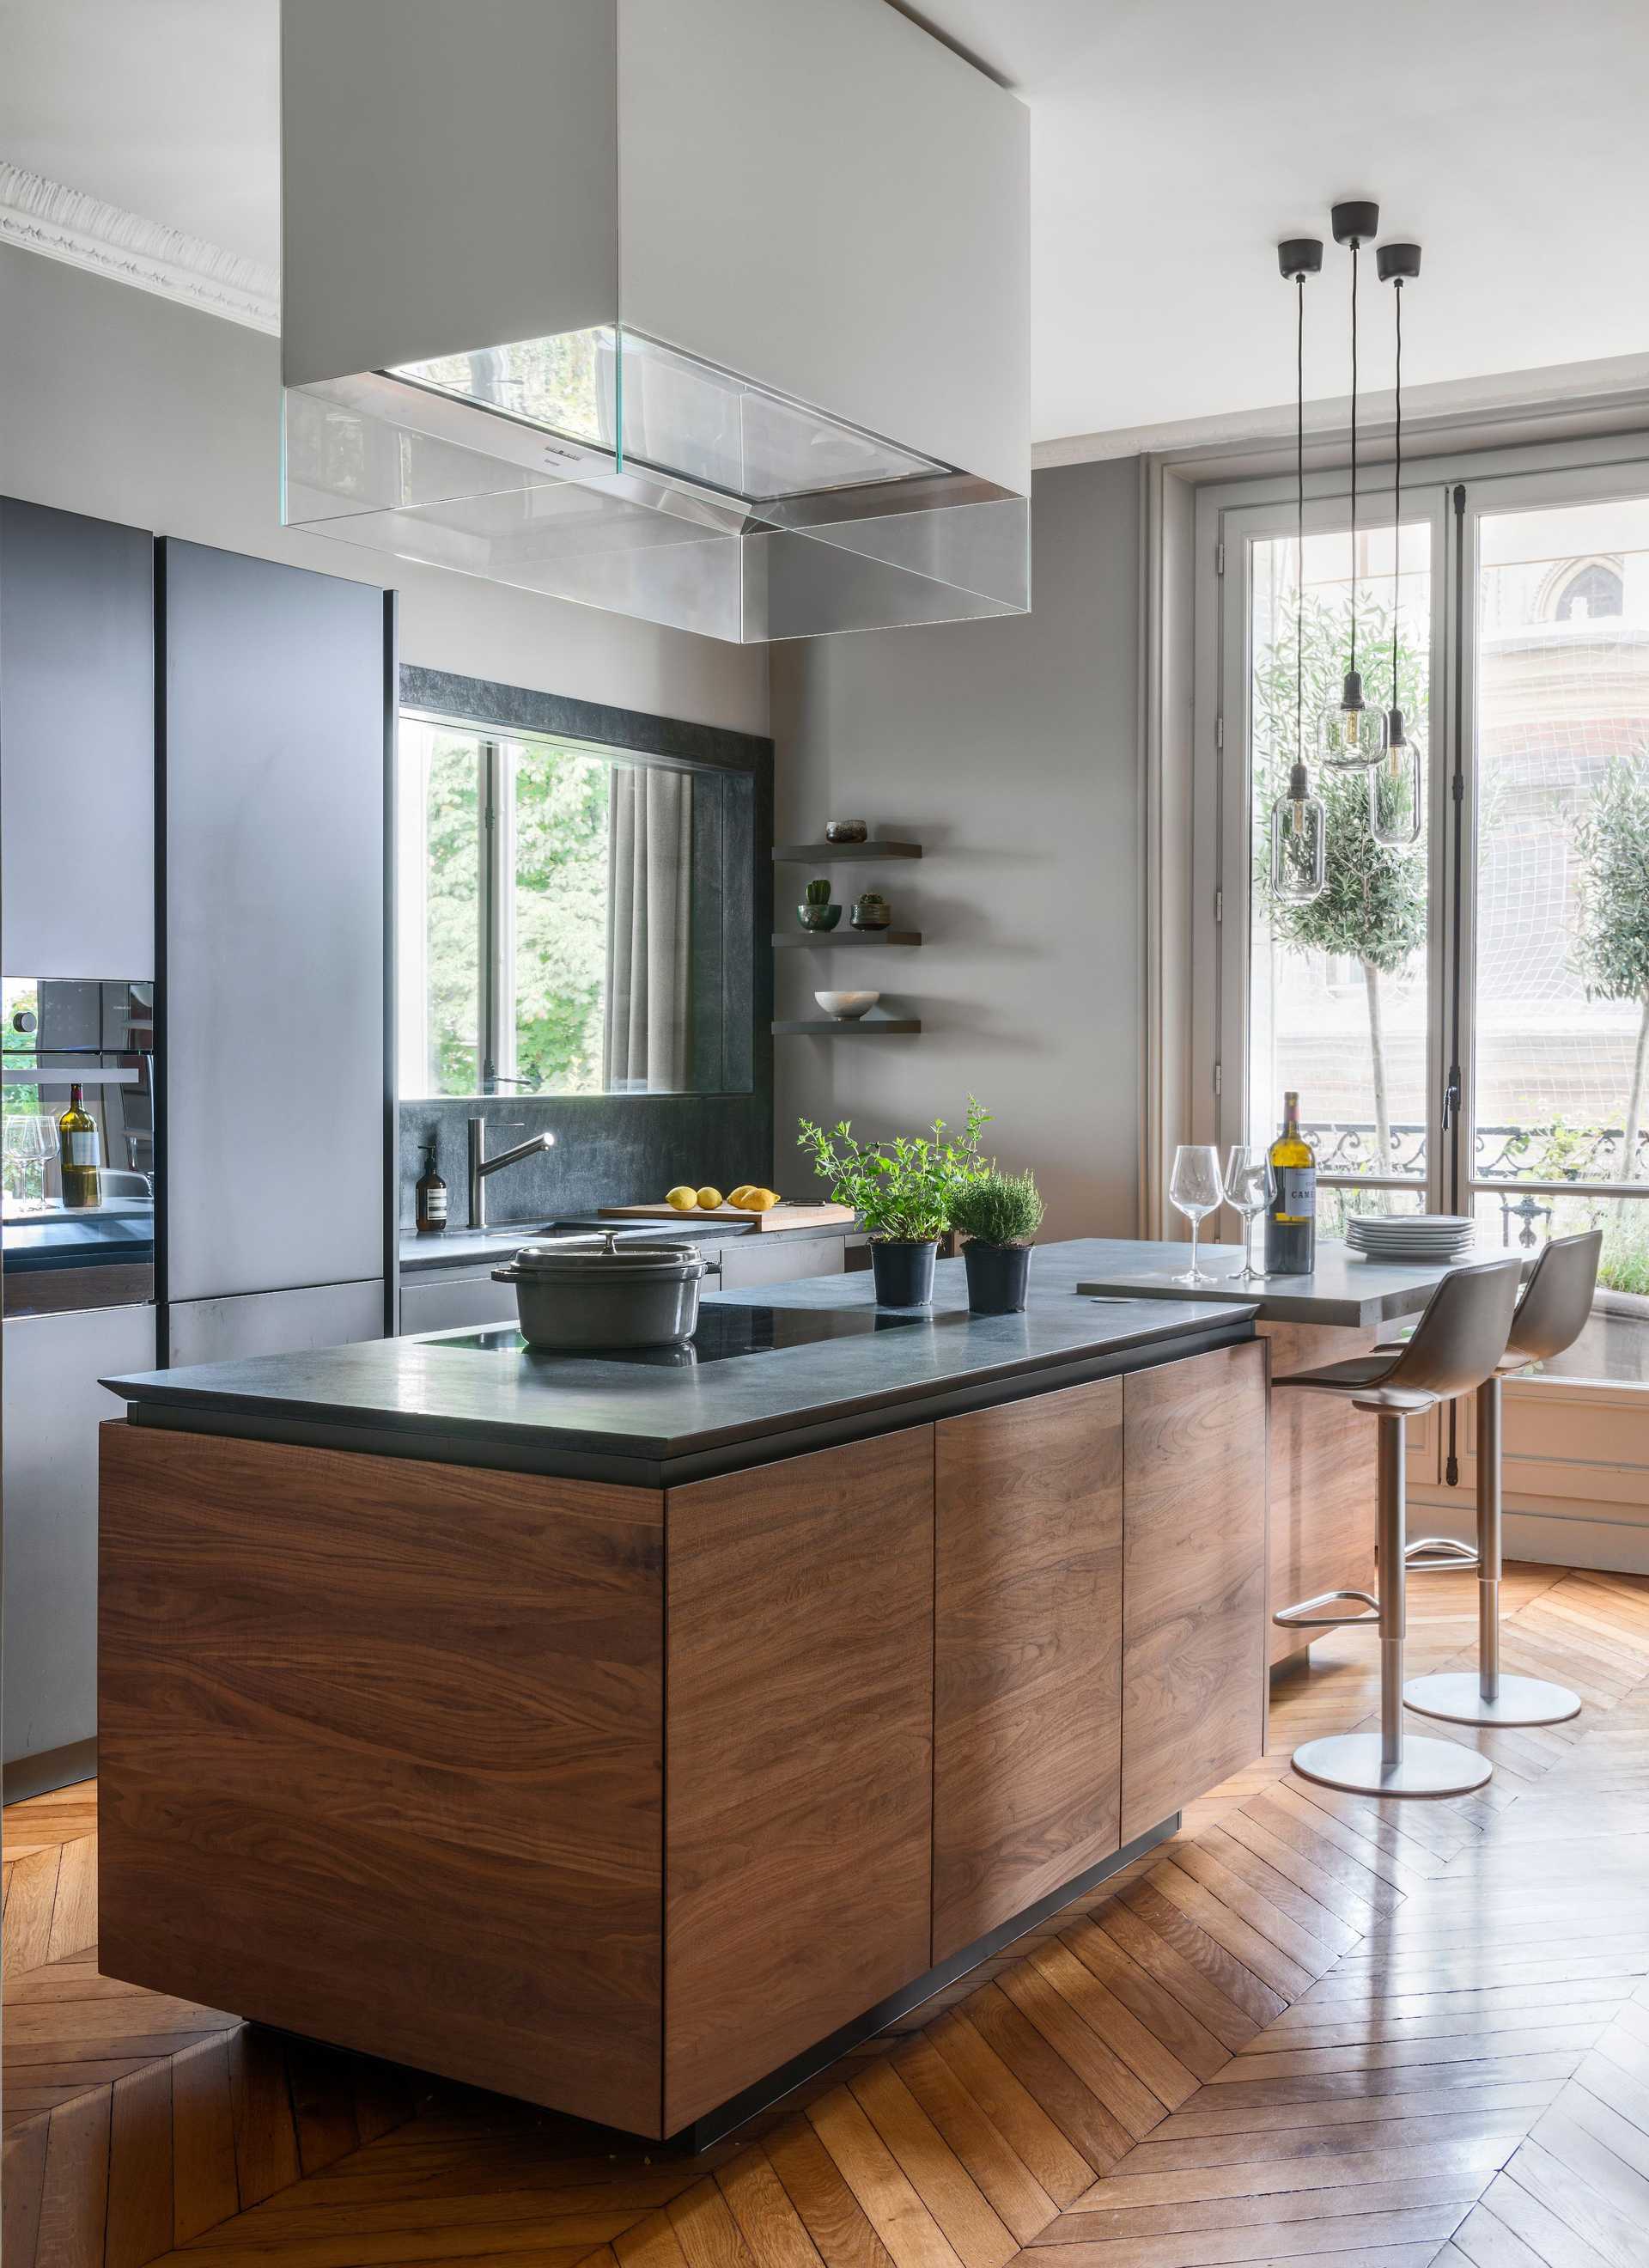 Design of an American kitchen by an interior designer in Toulouse